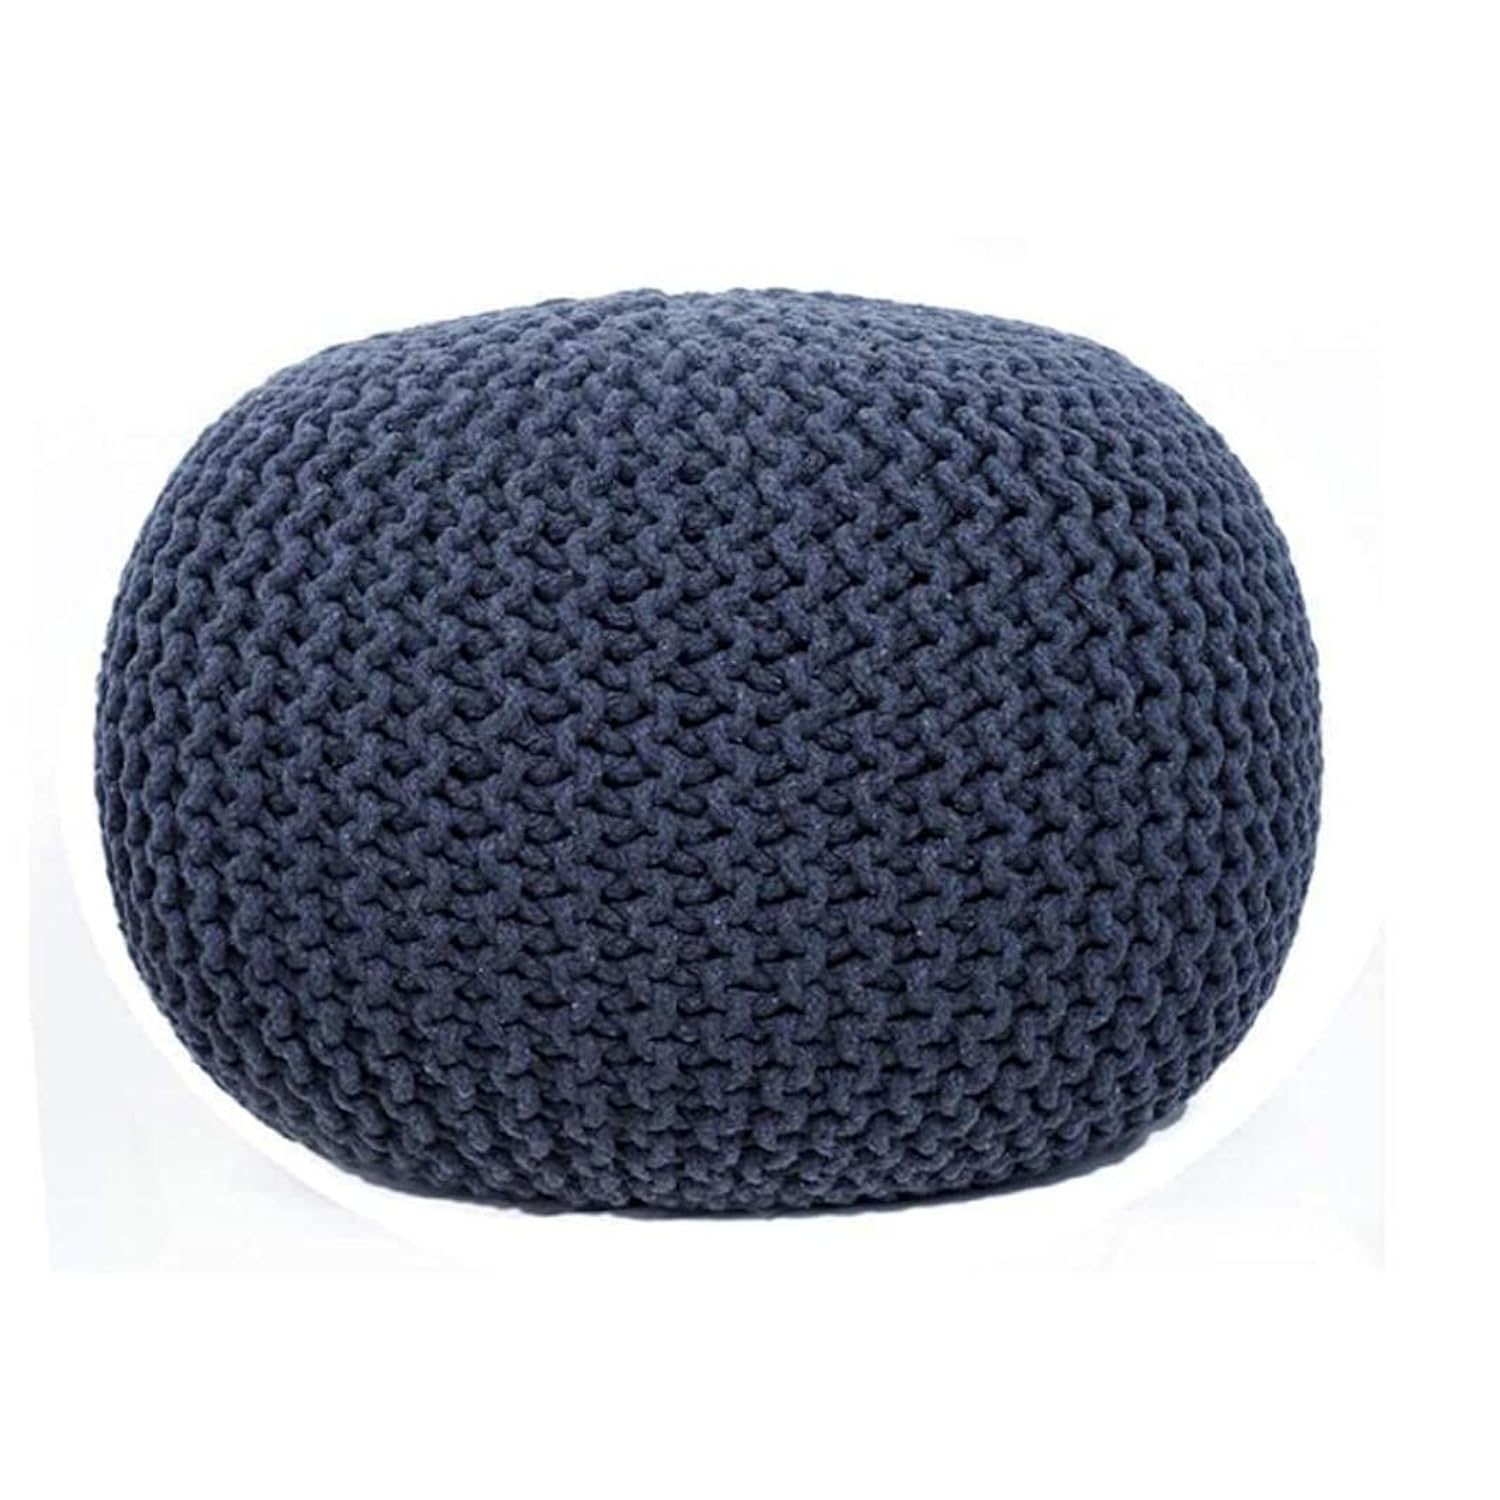 Hand Knitted Cotton Ottoman Pouf Footrest – BlessMyBucket